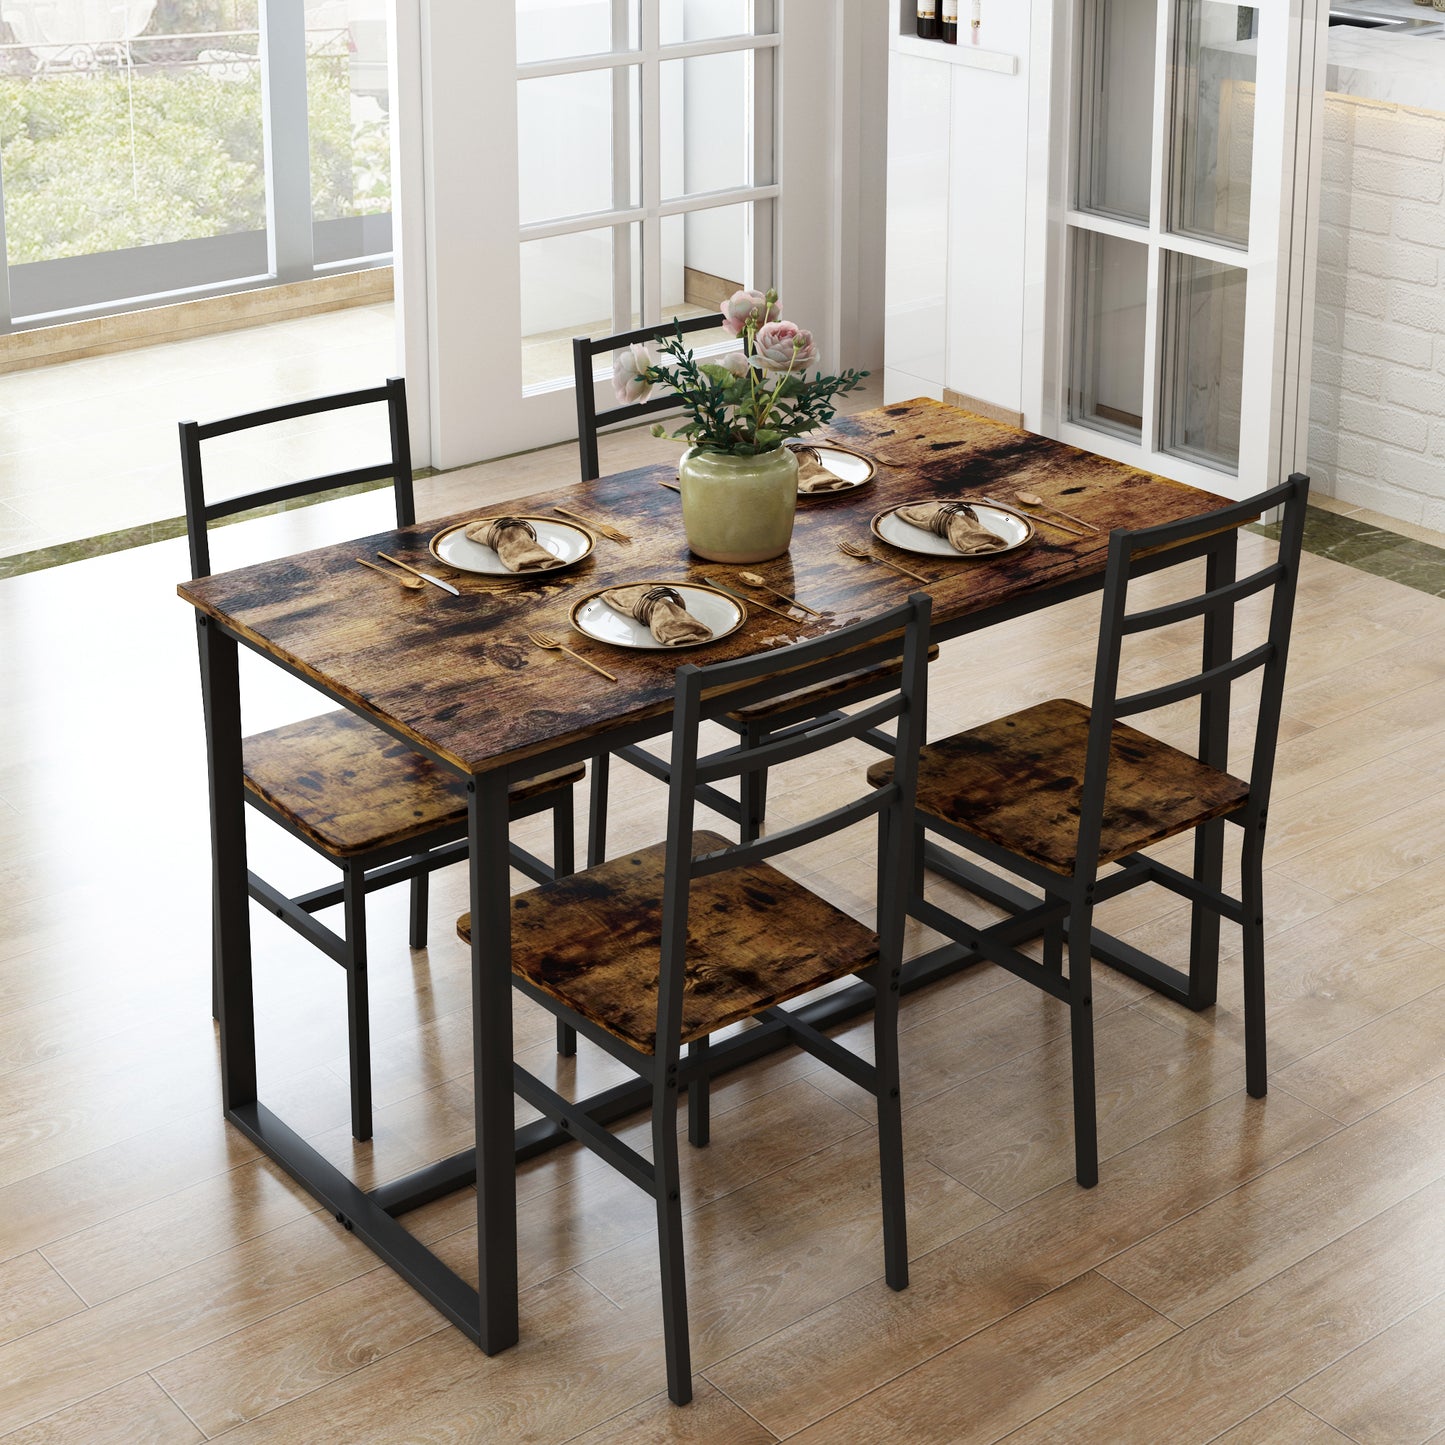 5 Piece Dining Table Set, Modern Rustic Table and Chairs Set for 4, Home Kitchen Breakfast Table Set, Dinette Table Set with 4 Chairs, Wooden Tabletop and Steel Frame, D6113